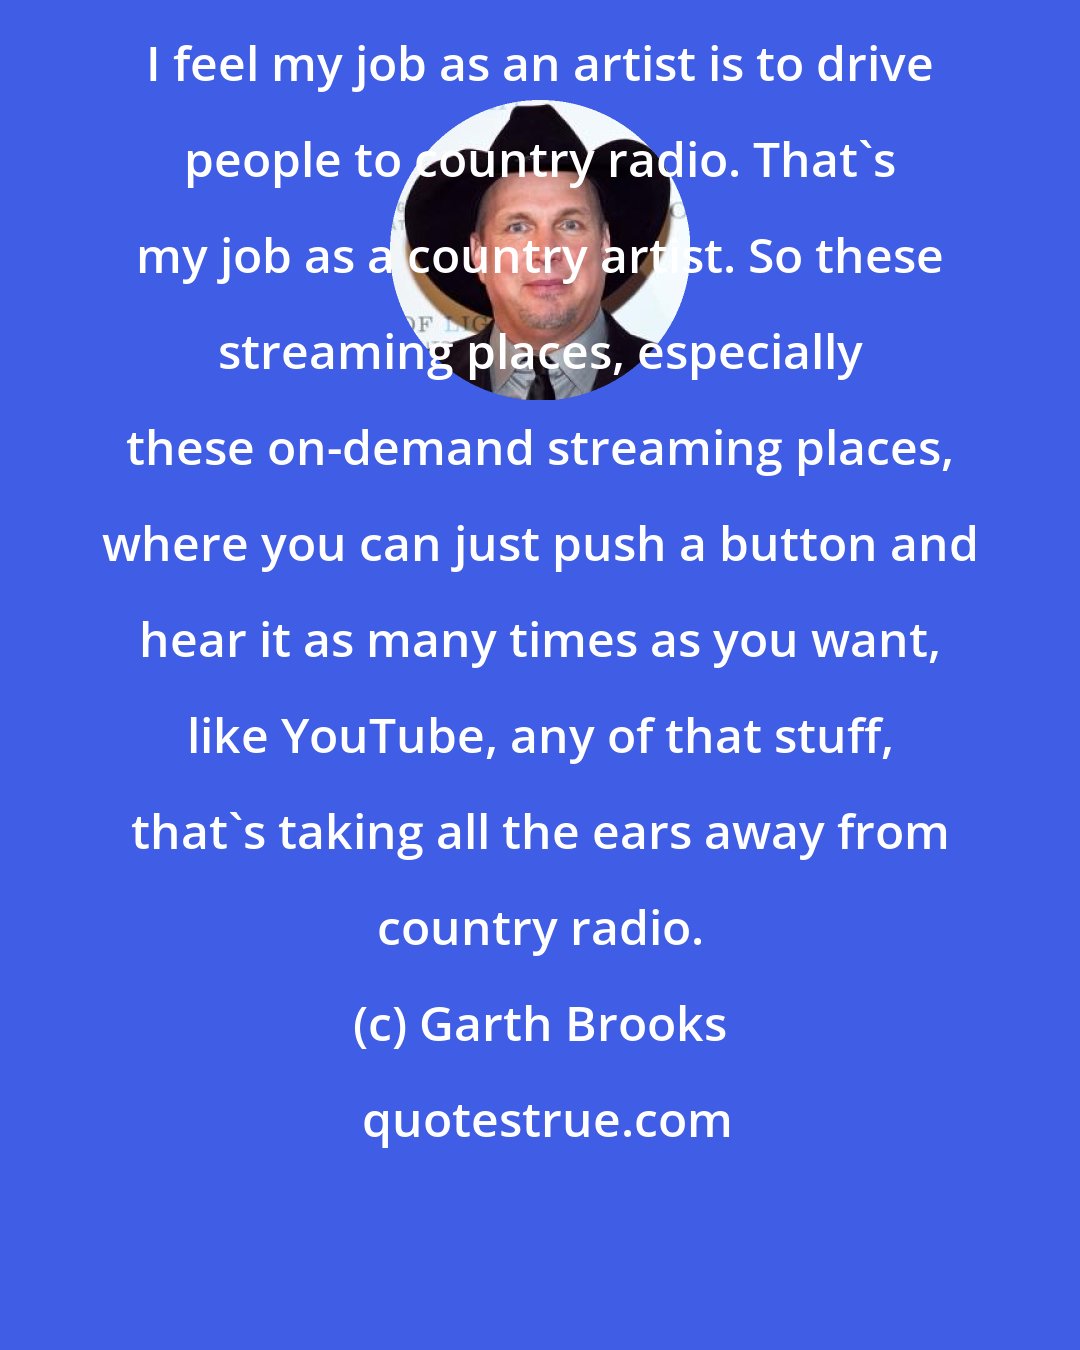 Garth Brooks: I feel my job as an artist is to drive people to country radio. That's my job as a country artist. So these streaming places, especially these on-demand streaming places, where you can just push a button and hear it as many times as you want, like YouTube, any of that stuff, that's taking all the ears away from country radio.